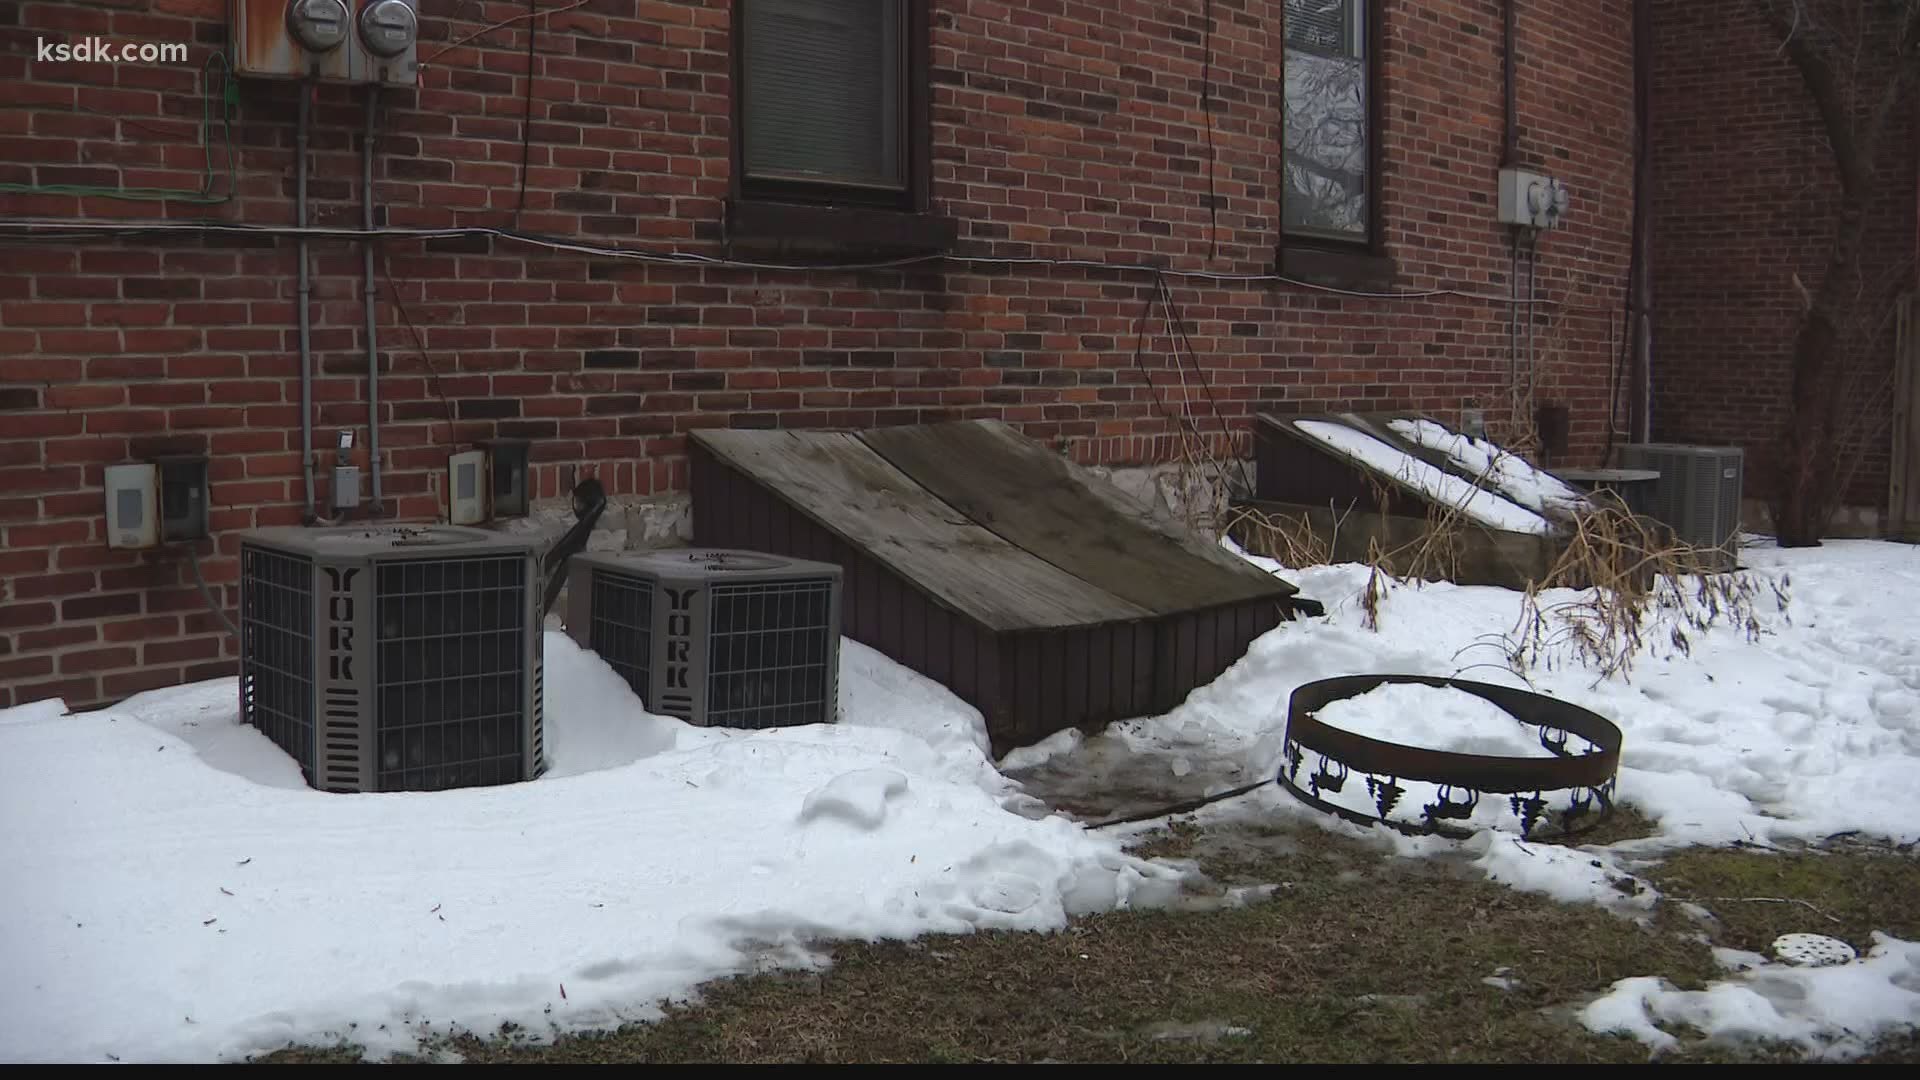 McCullough said after several visits from an HVAC company and maintenance men, she was told changing the furnace filter was her responsibility.